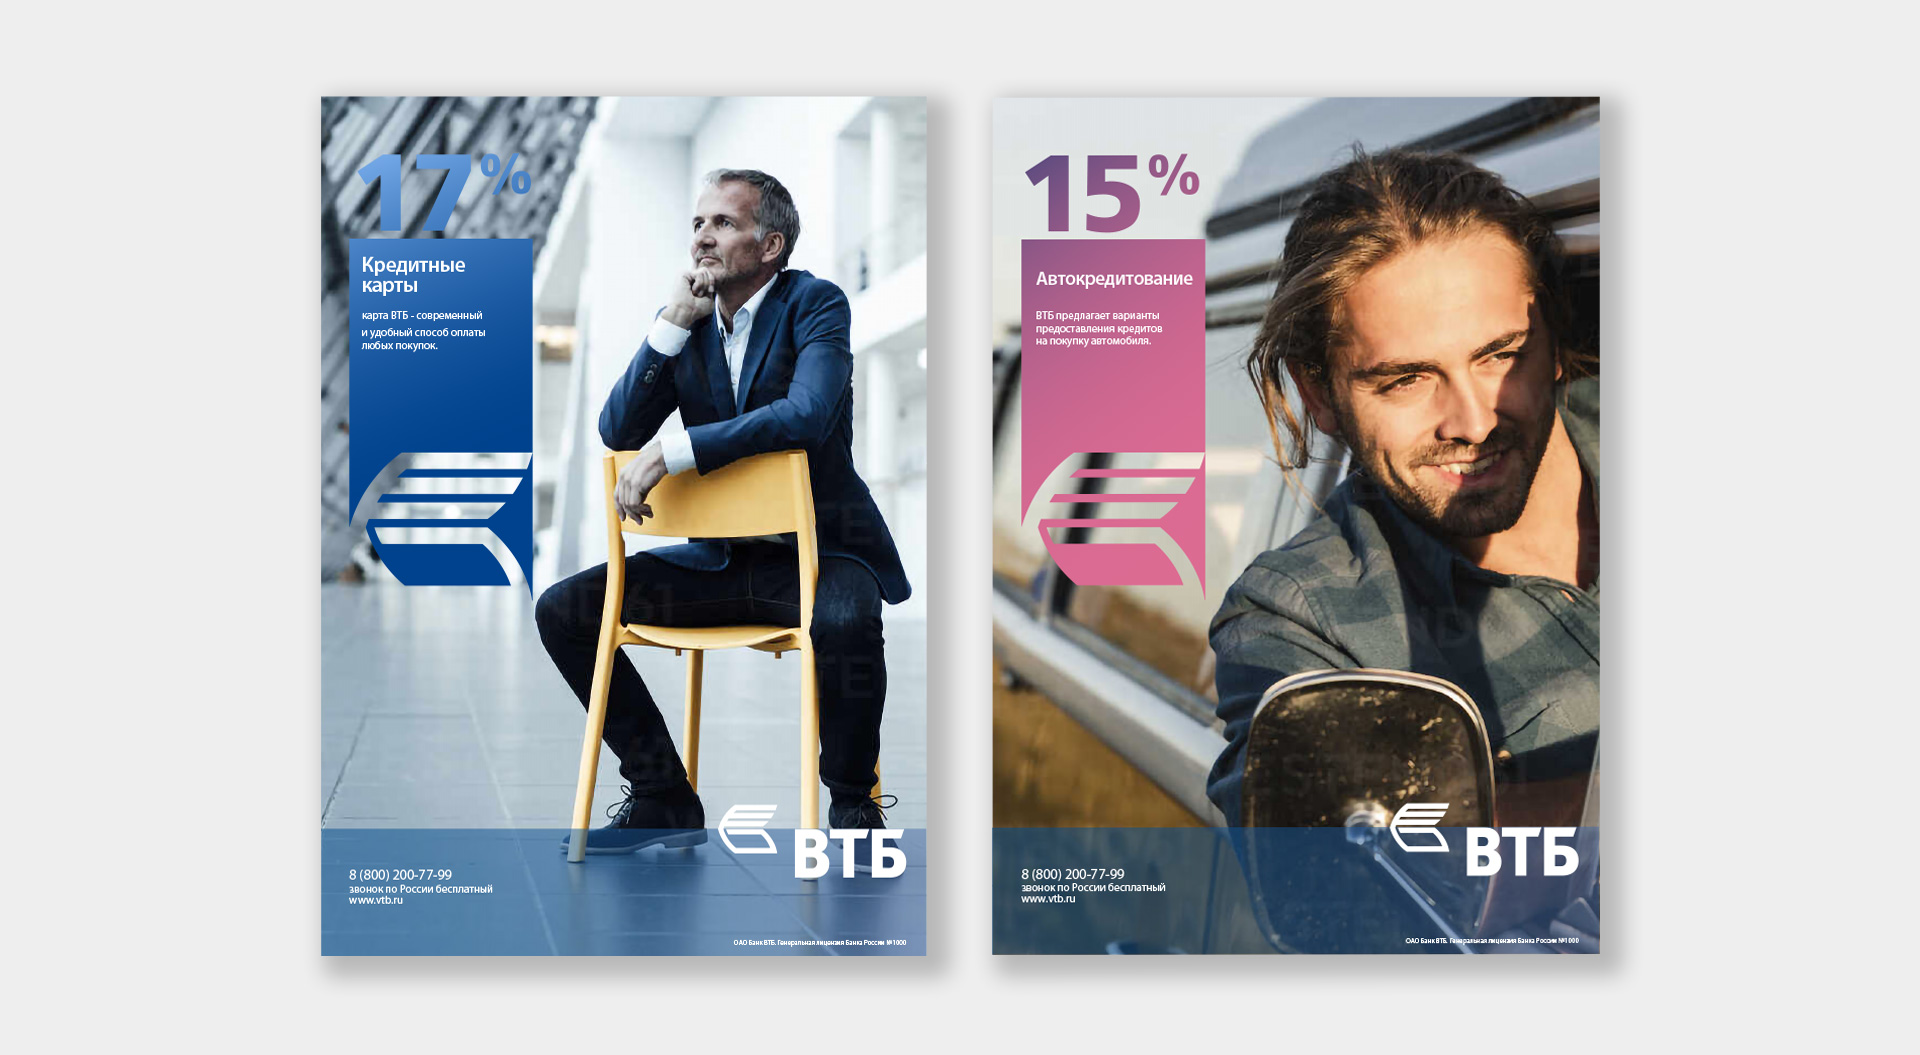 VTB Bank express branch and advertising communications, motor vehicle and credit card finance